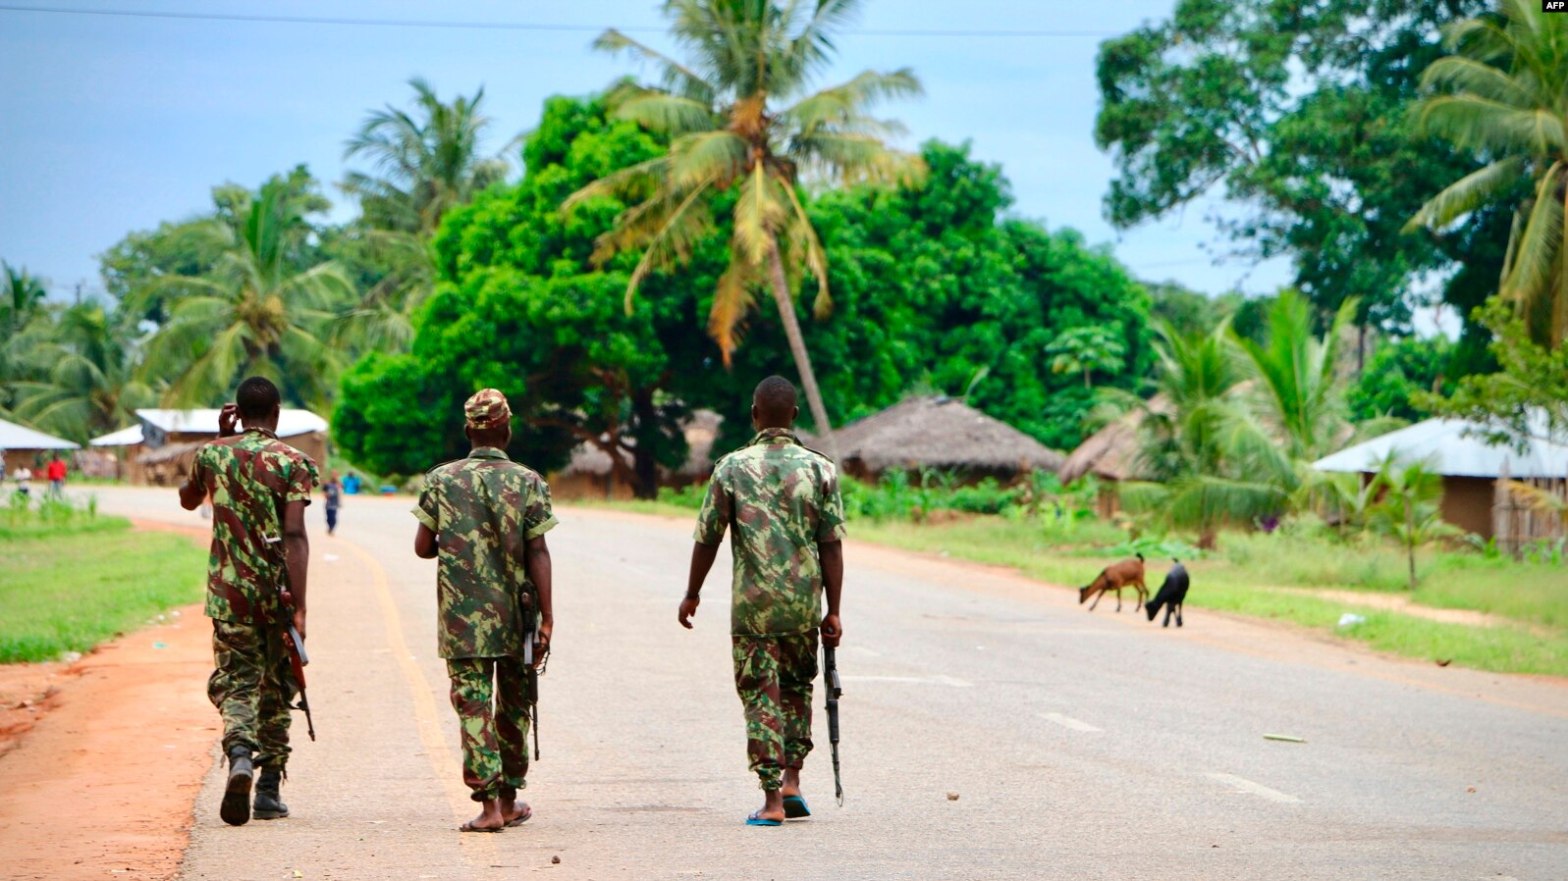 In this file photo taken on March 7, 2018, Soldiers from the Mozambican army patrol the streets after security in the area was increased, following a two-day attack from suspected Islamists in October last year./Source: https://www.voanews.com/a/extremism-watch_3-years-insurgency-mozambiques-cabo-delgado-remains-vulnerable/6196872.html